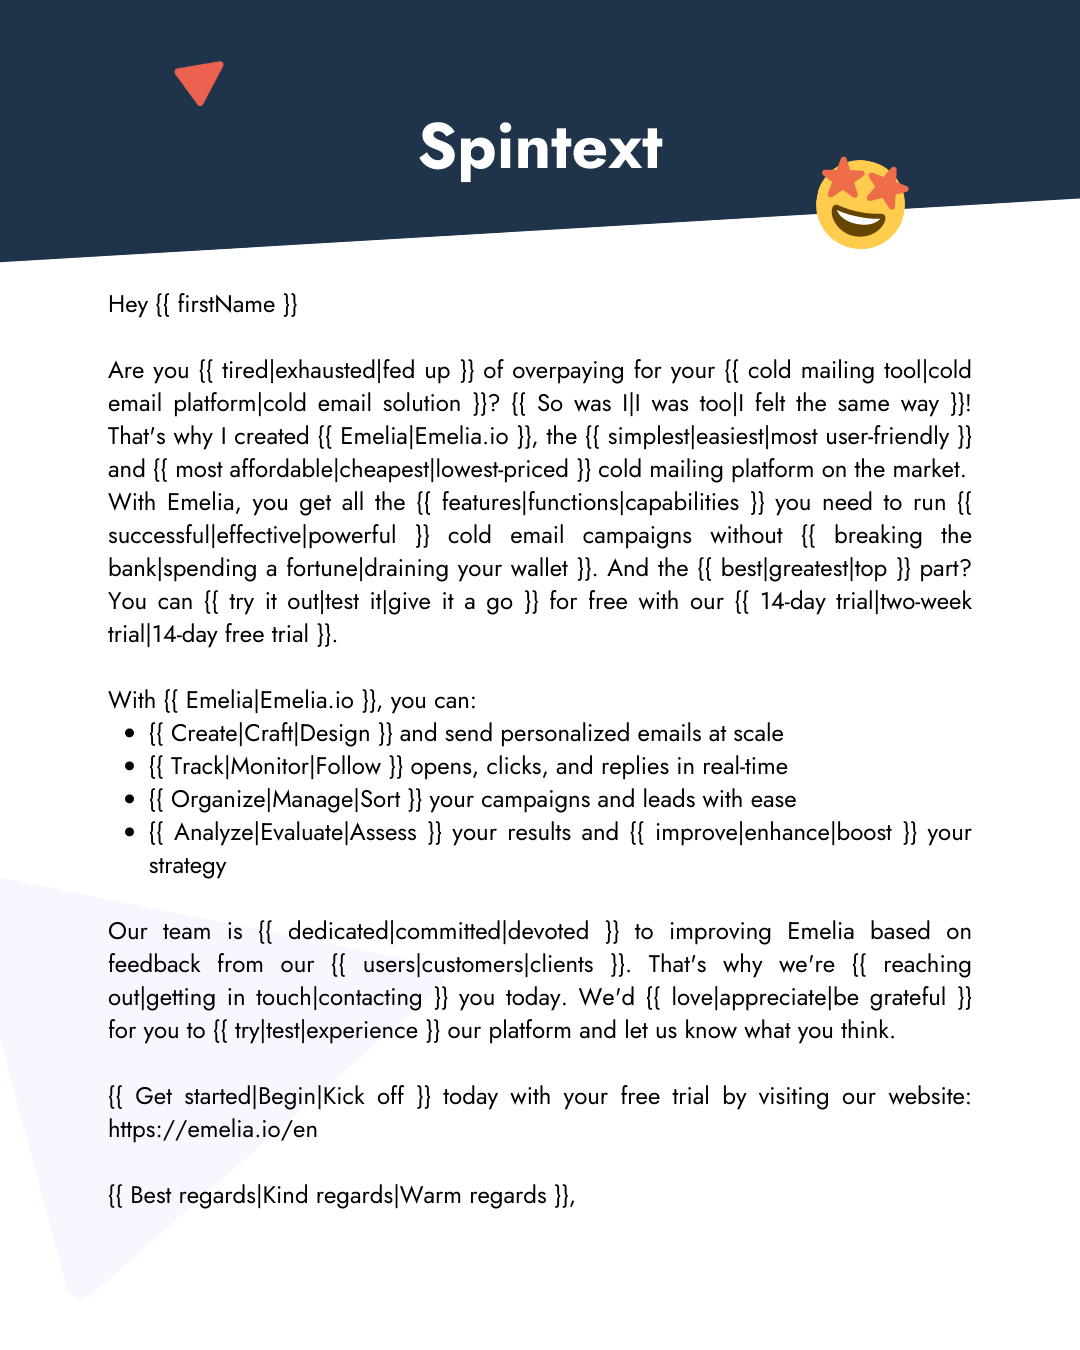 Spintext cold mailing